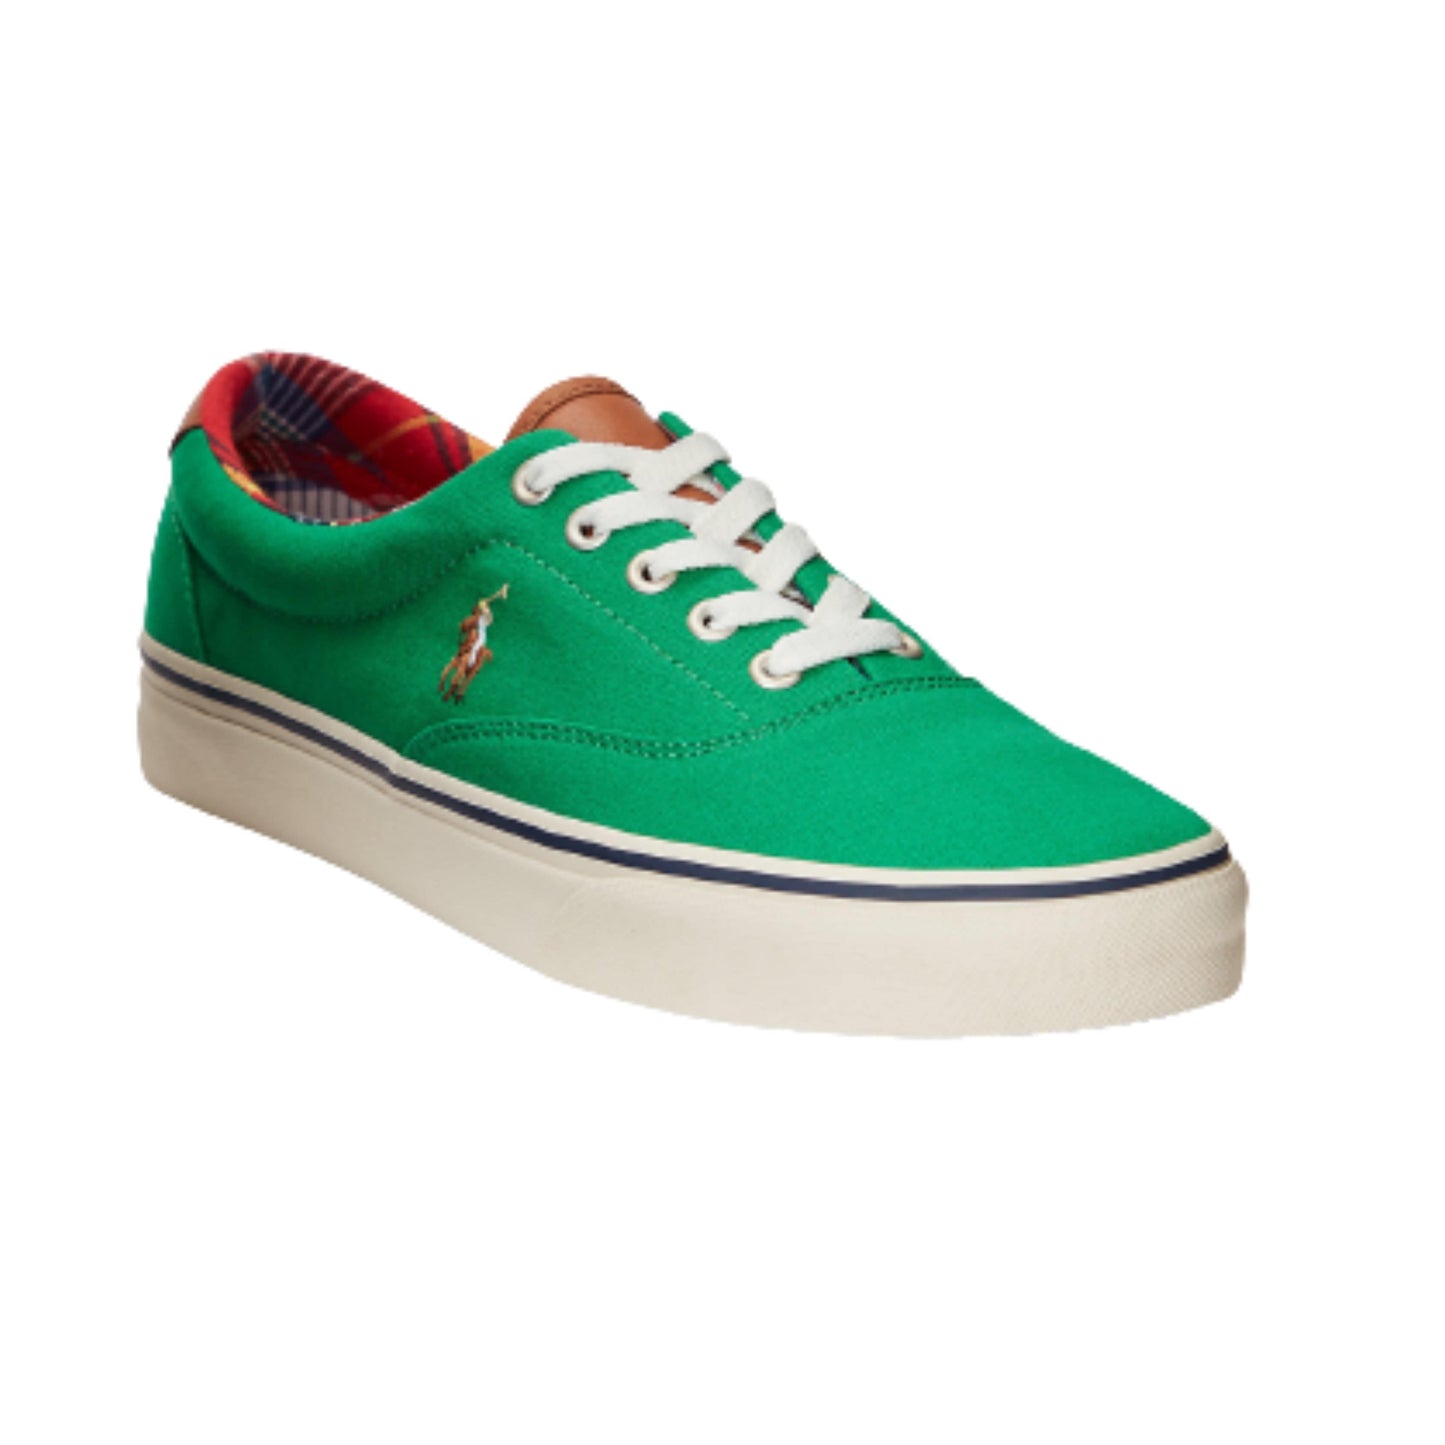 POLO Mens Shoes 45 / Green POLO - KEATON CANVAS & LEATHER PONY SNEAKERS